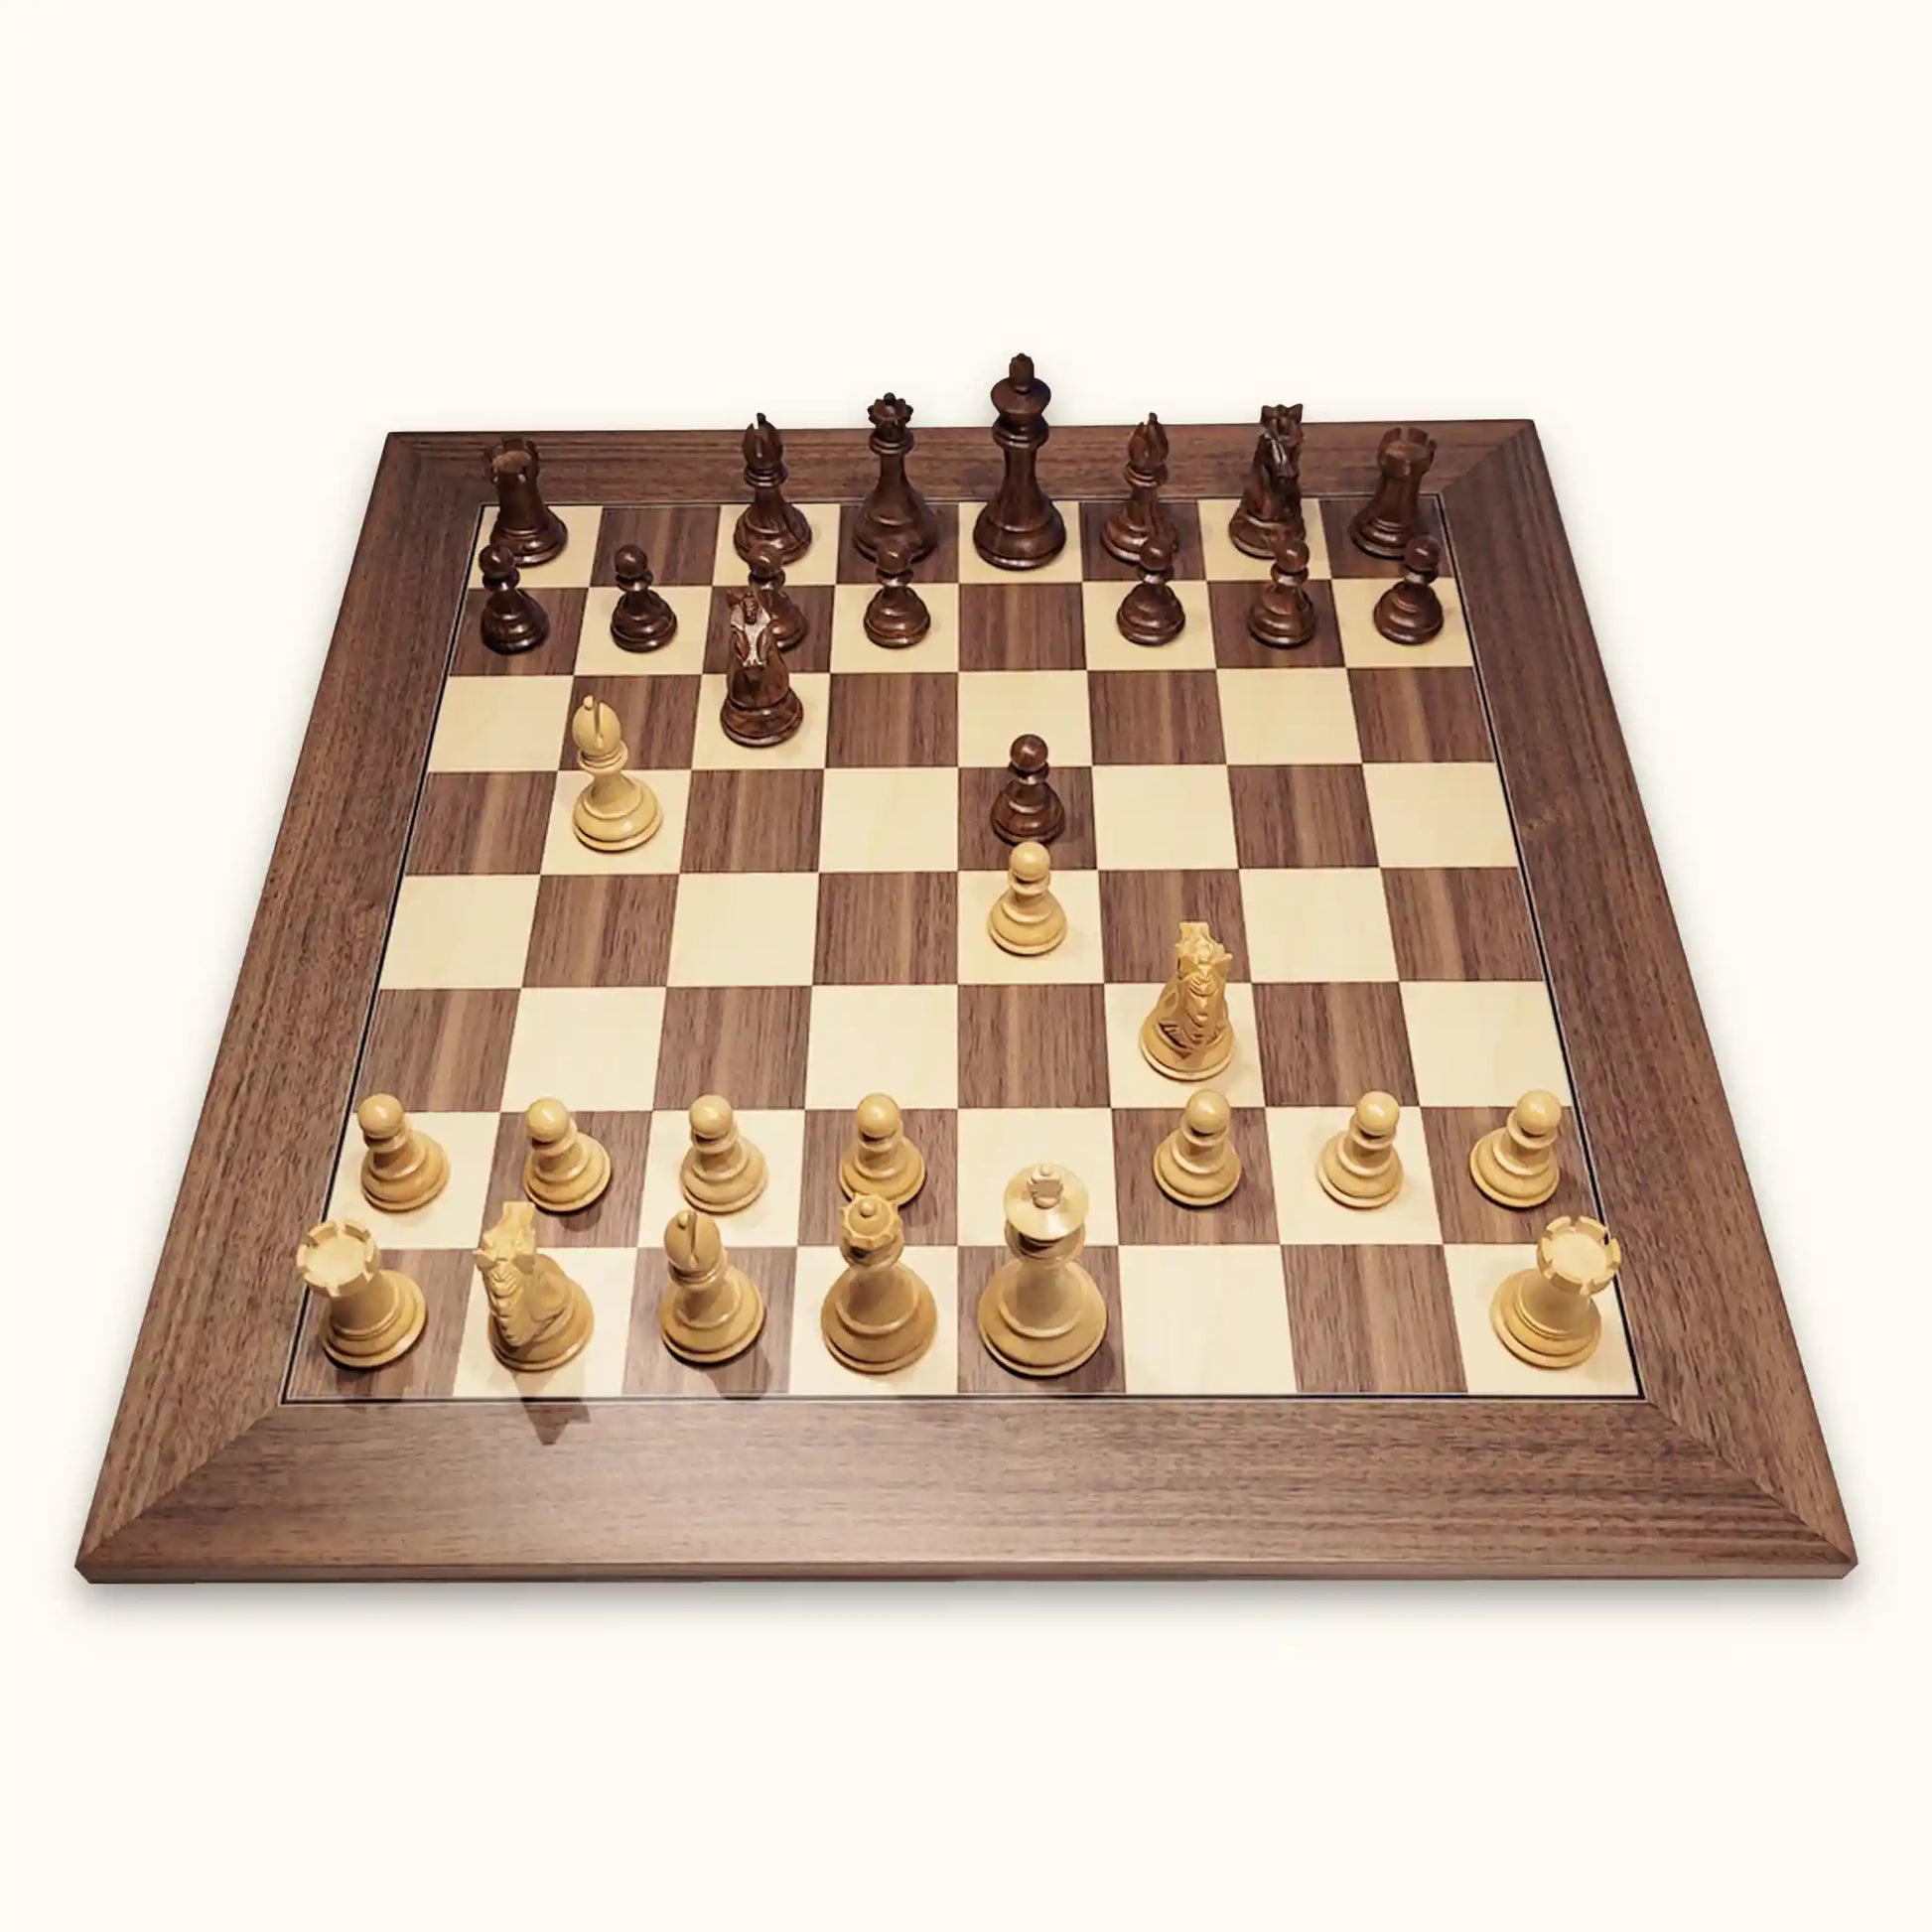 Chess pieces alban knight palisander on walnut chessboard top